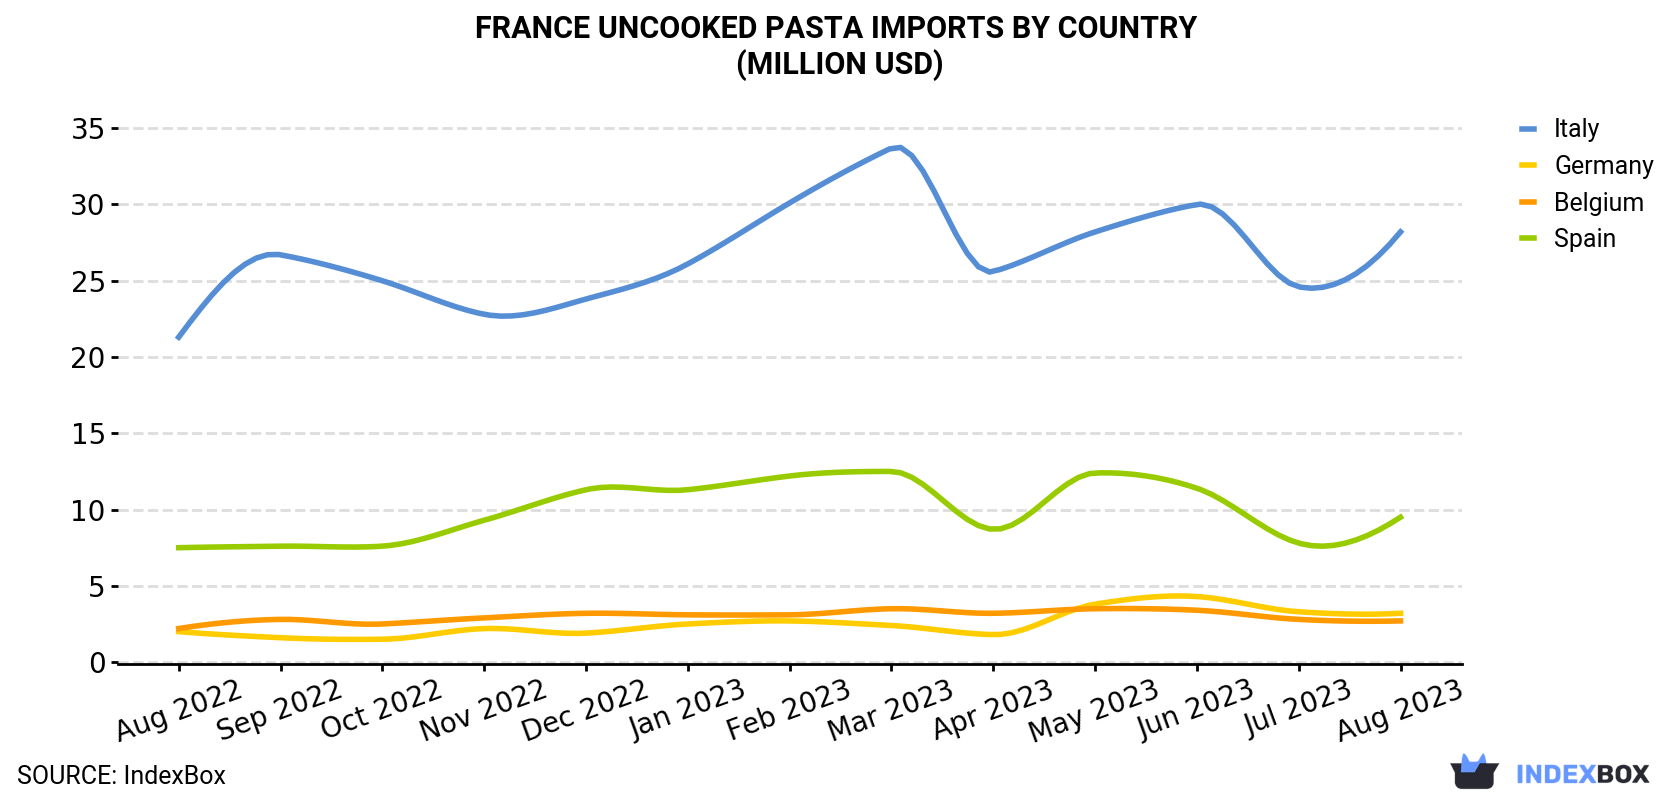 France Uncooked Pasta Imports By Country (Million USD)